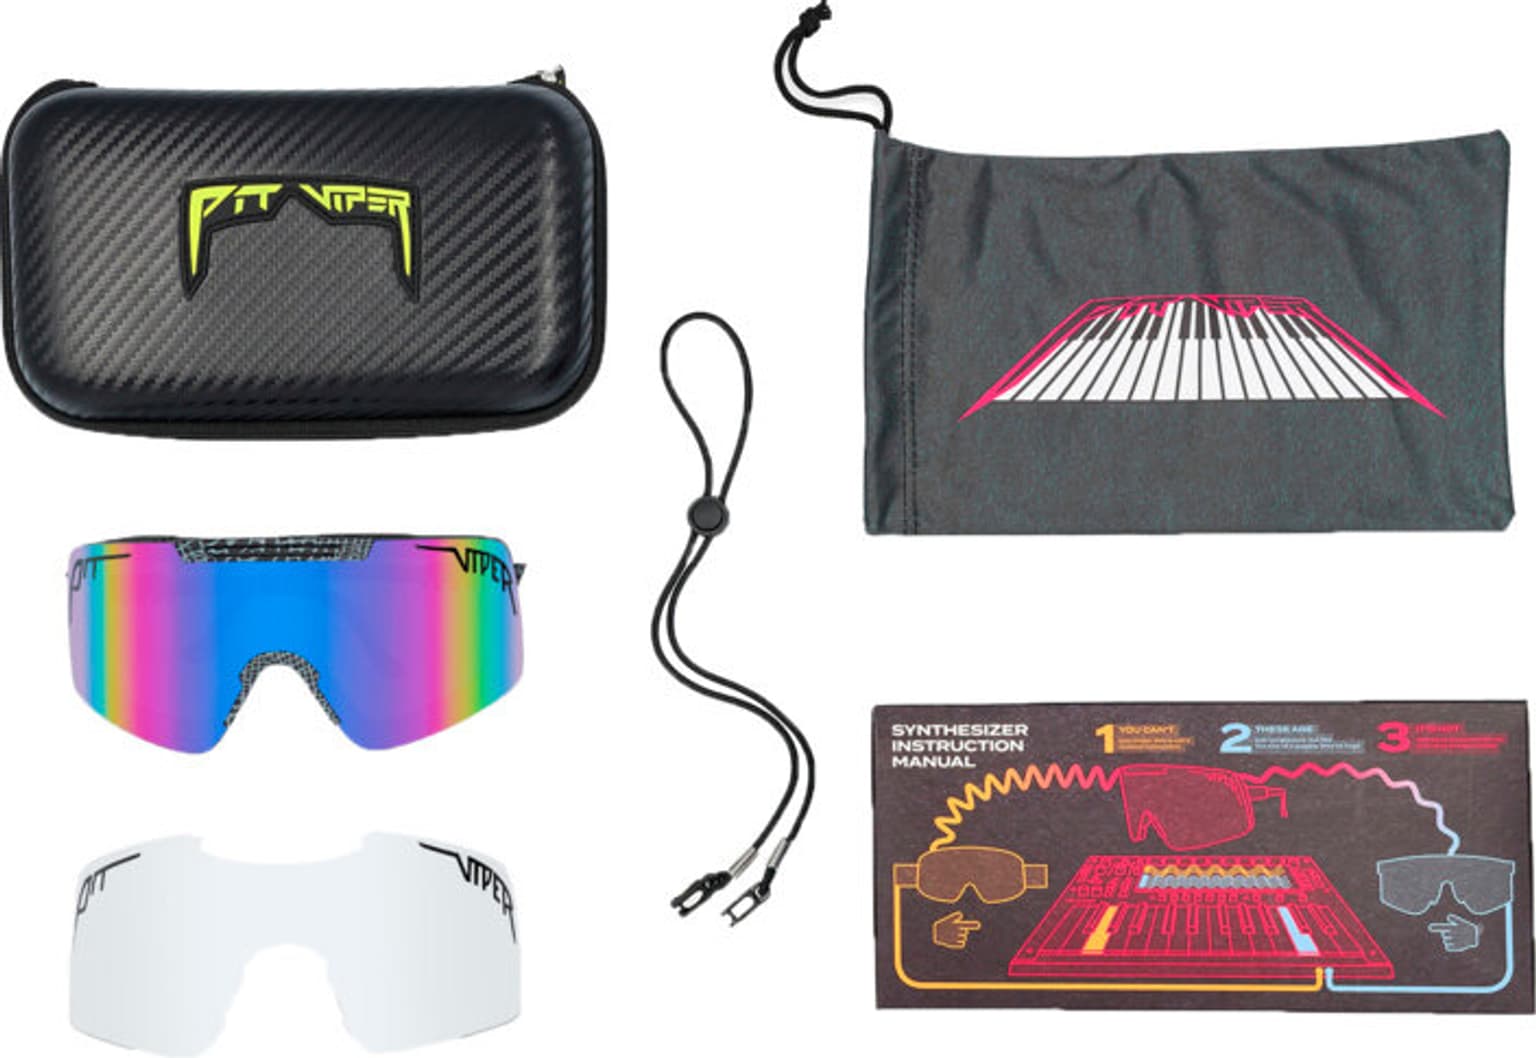 Pit Viper Pit Viper The Synthesizer The Mangrove Sportbrille 3